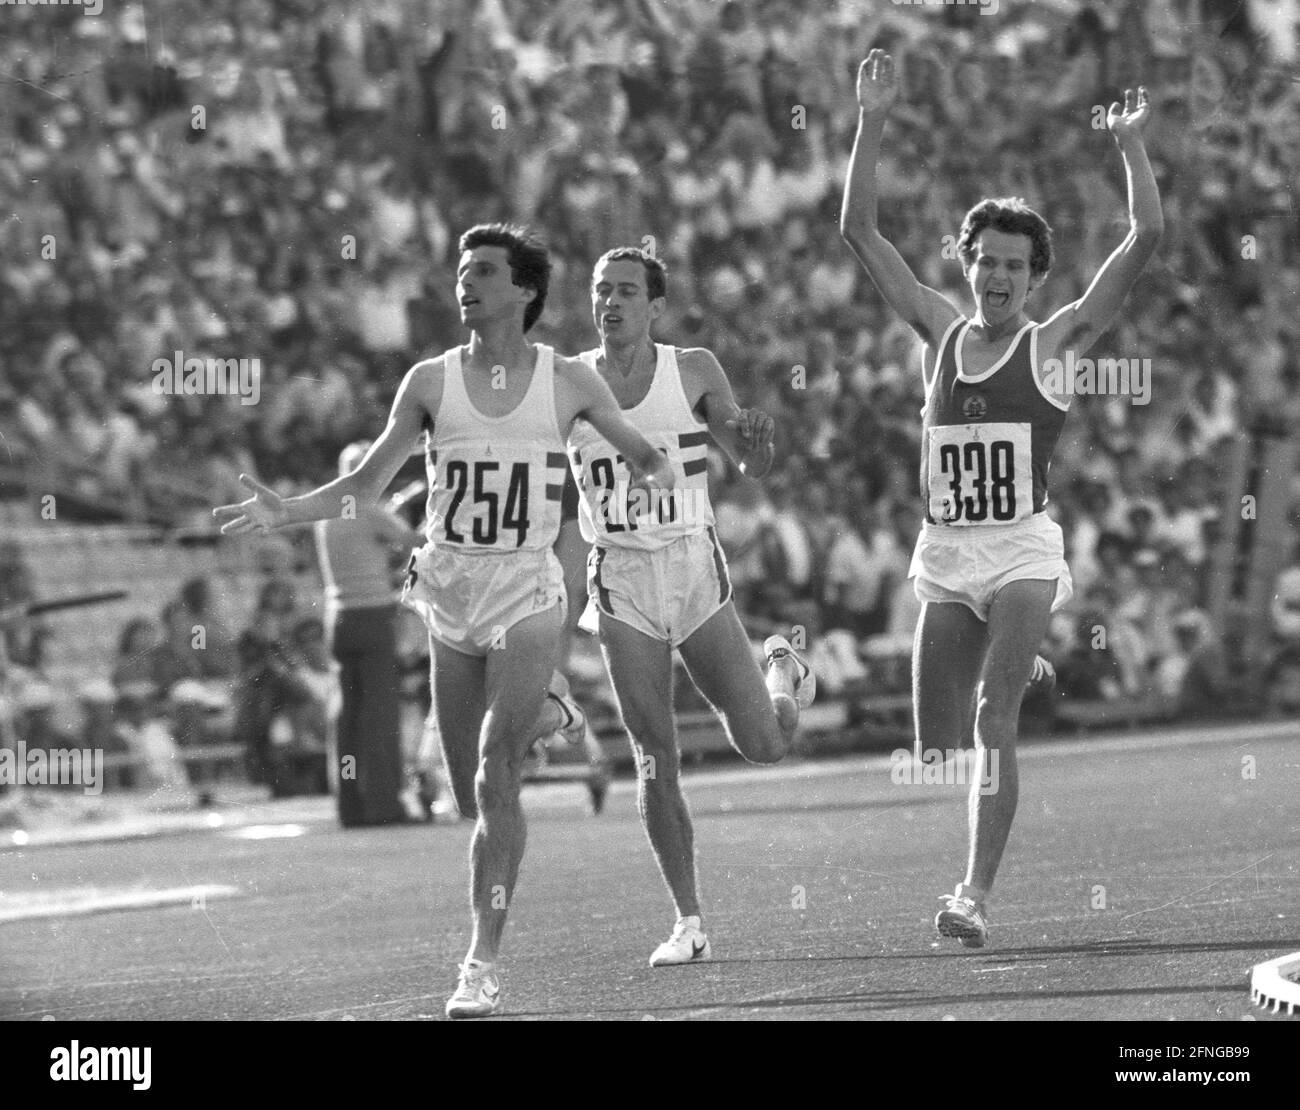 Olympic Games 1980 Moscow / Athletics / 1500m finish photo: Sebastian Coe (front left) as winner at the finish. Behind him: Steve Ovett (bronze/both GBR). On the right Jürgen Straub (GDR) celebrates his silver medal. 31.07.1980. [automated translation] Stock Photo